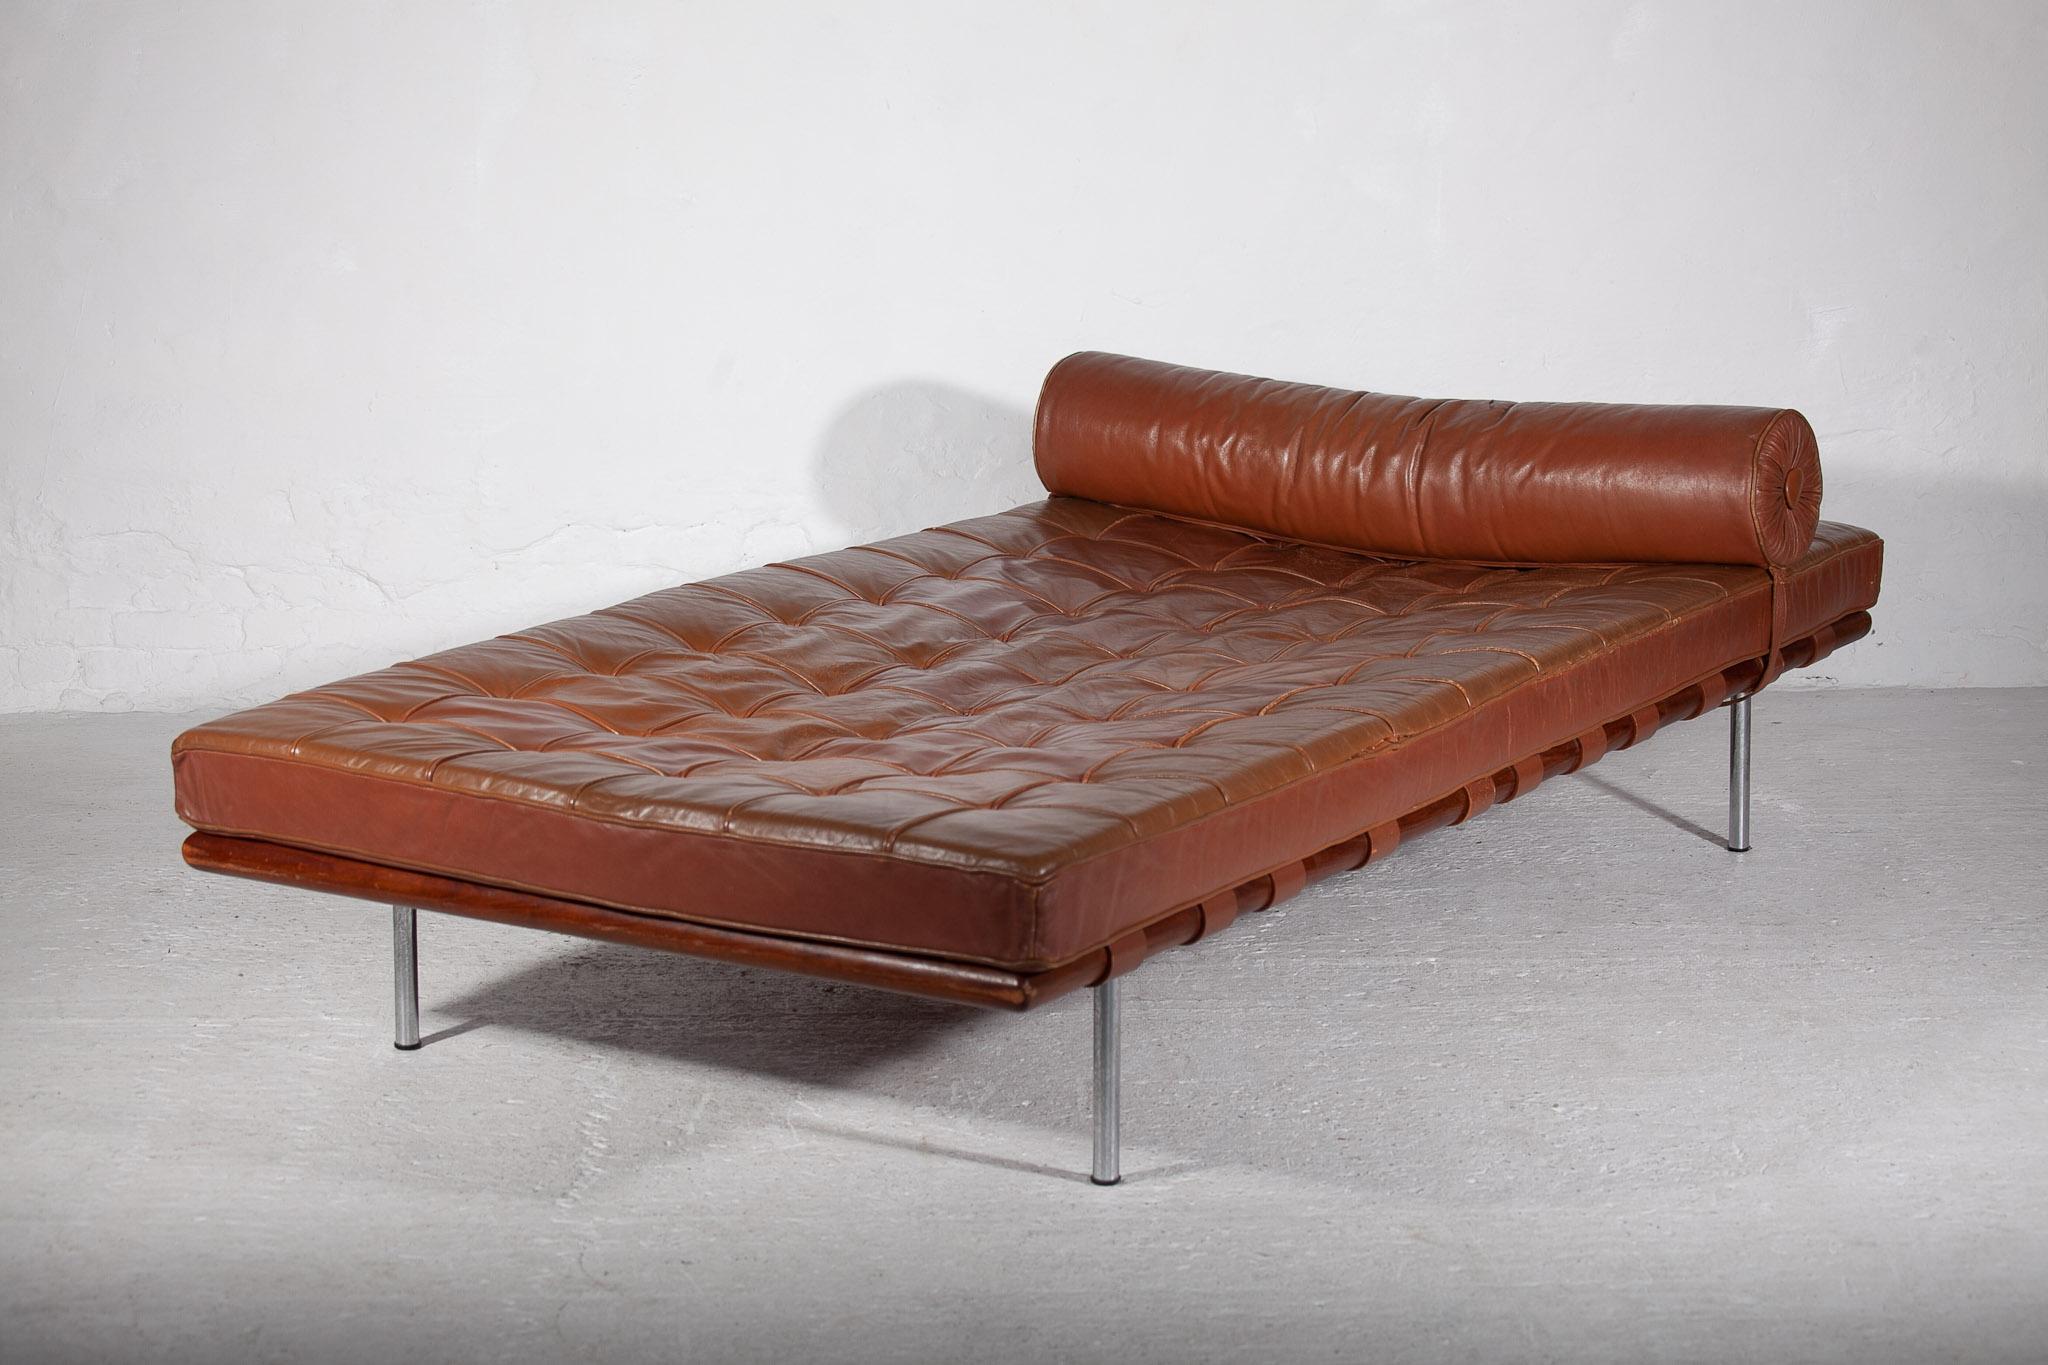 Iconic original brown leather patchwork daybed designed by Mies van der Rohe, produced by Knoll in the 1960s. Beautiful patina and very good quality leather upholstery designed mattress in combination with a teak wooden frame and chrome legs.
The